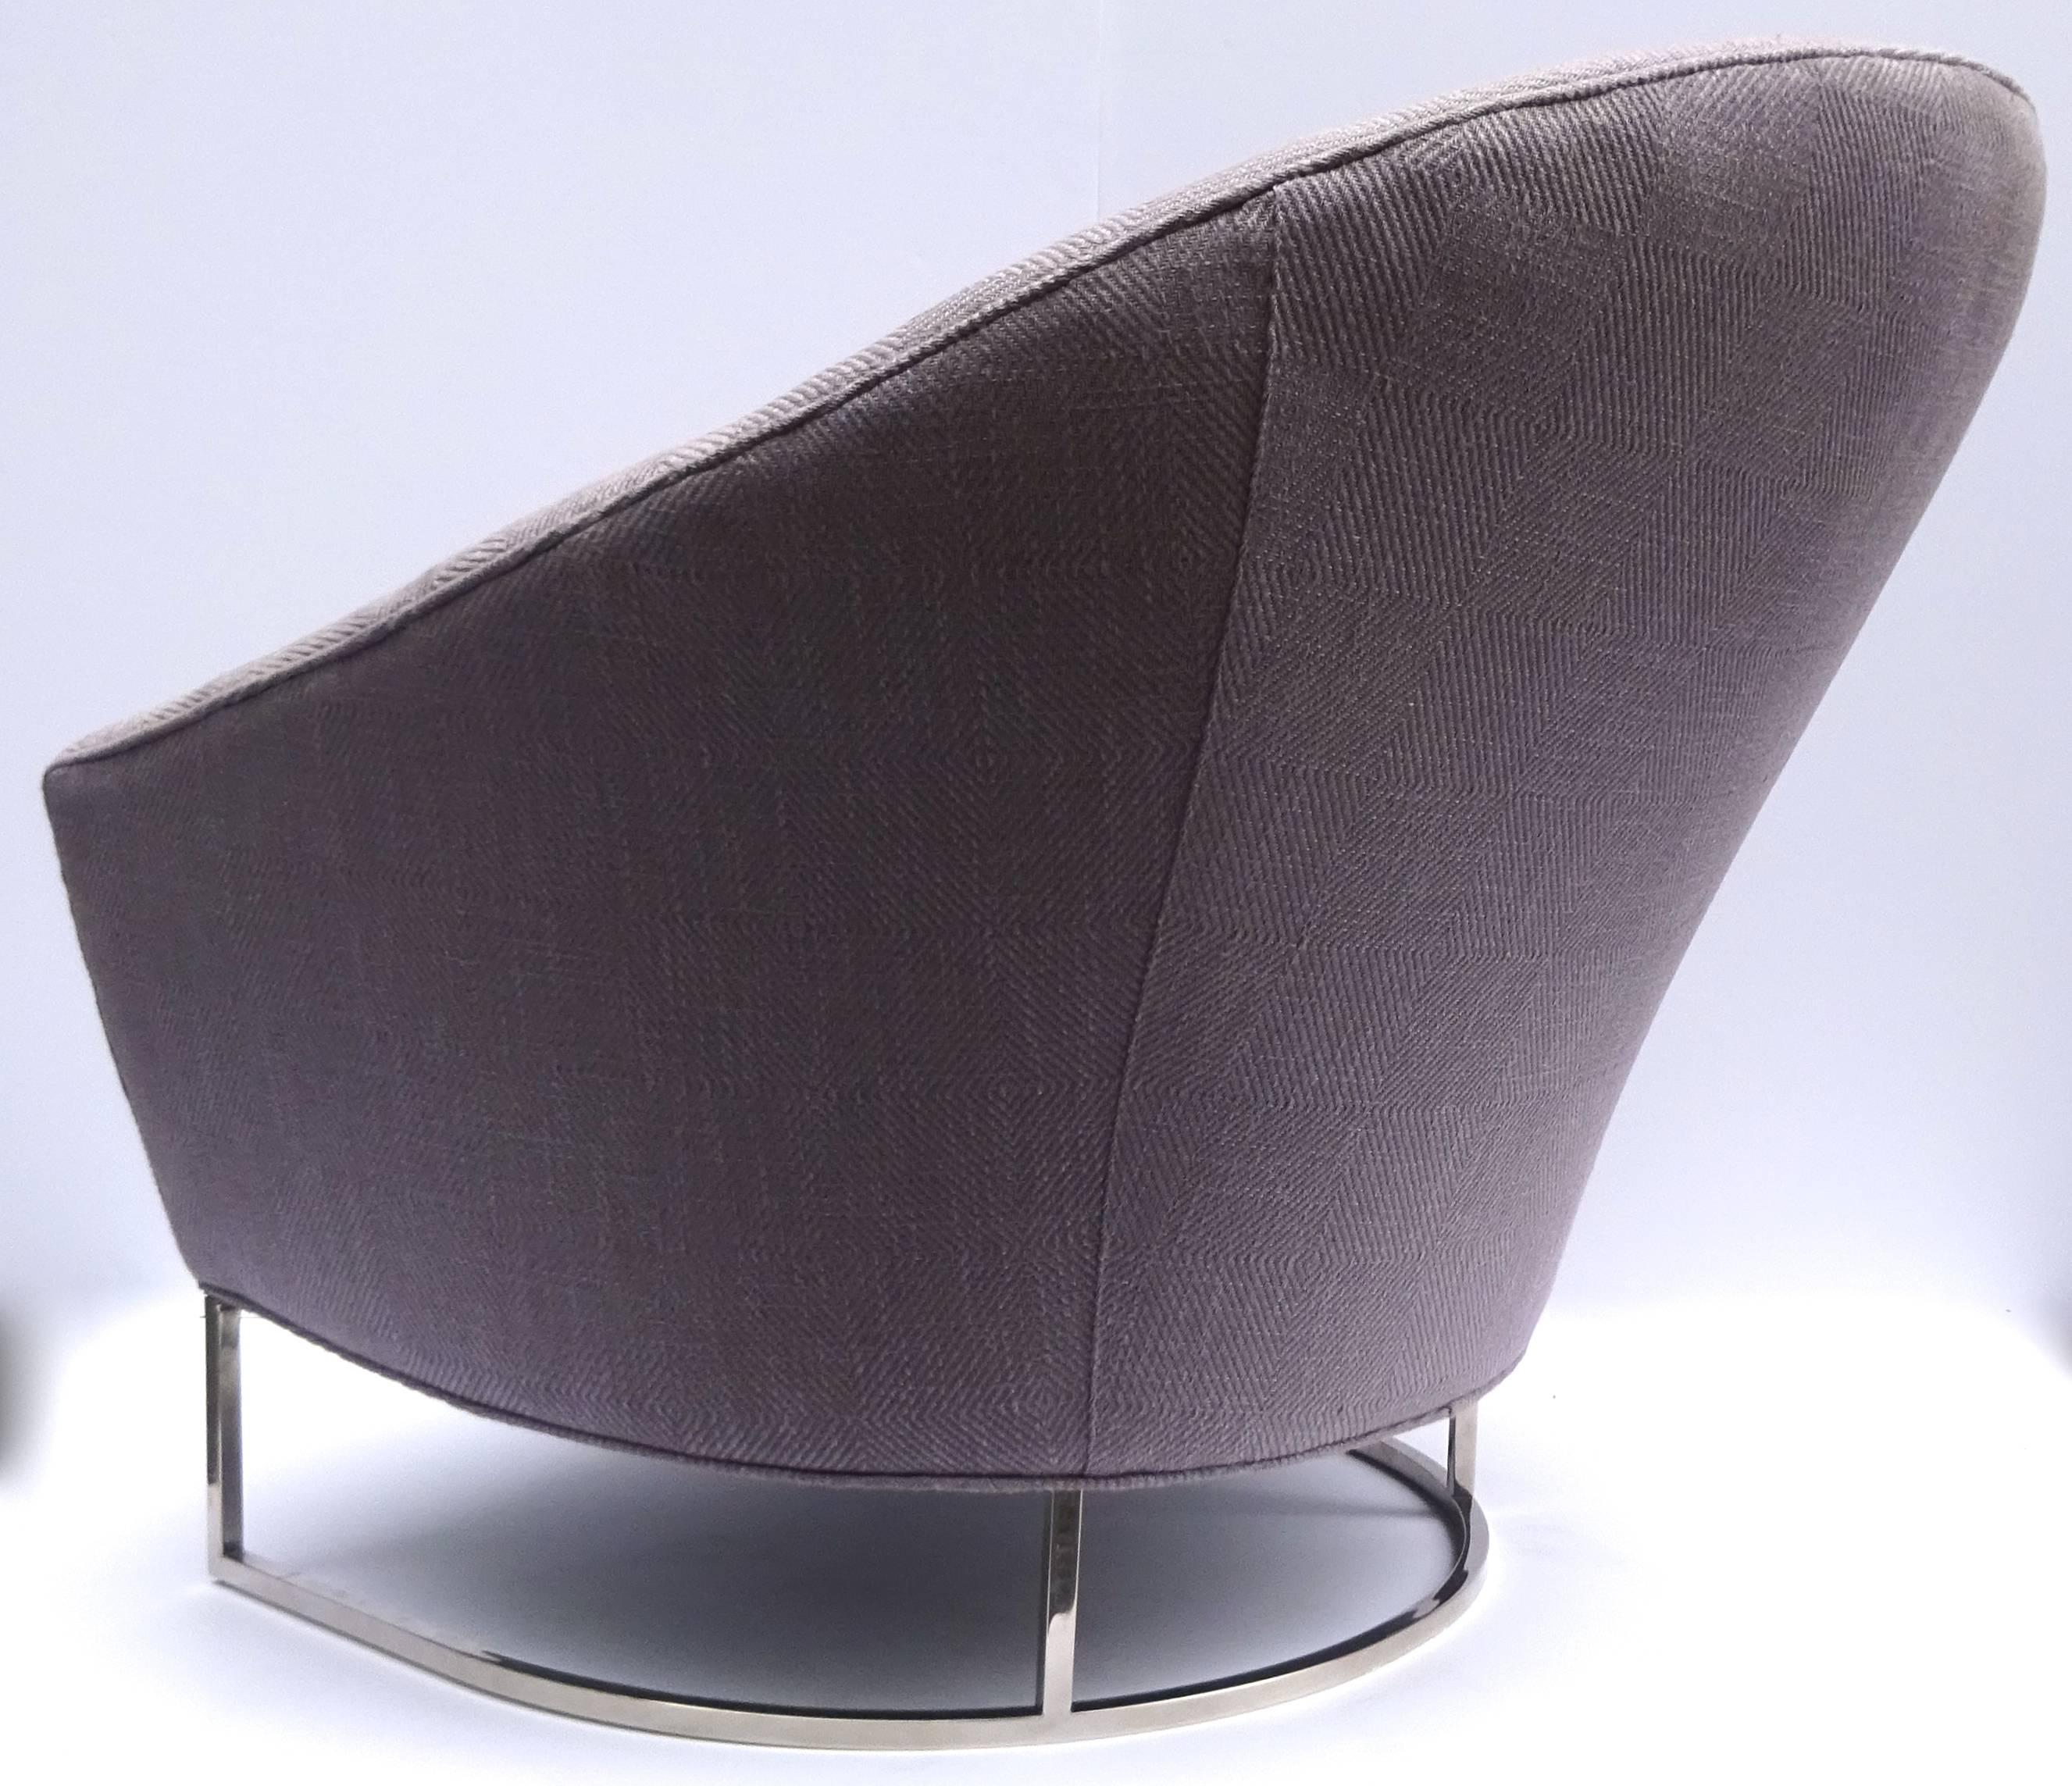 Large Sculptural 1970s Milo Baughman Lounge Chair In Excellent Condition For Sale In Washington, DC